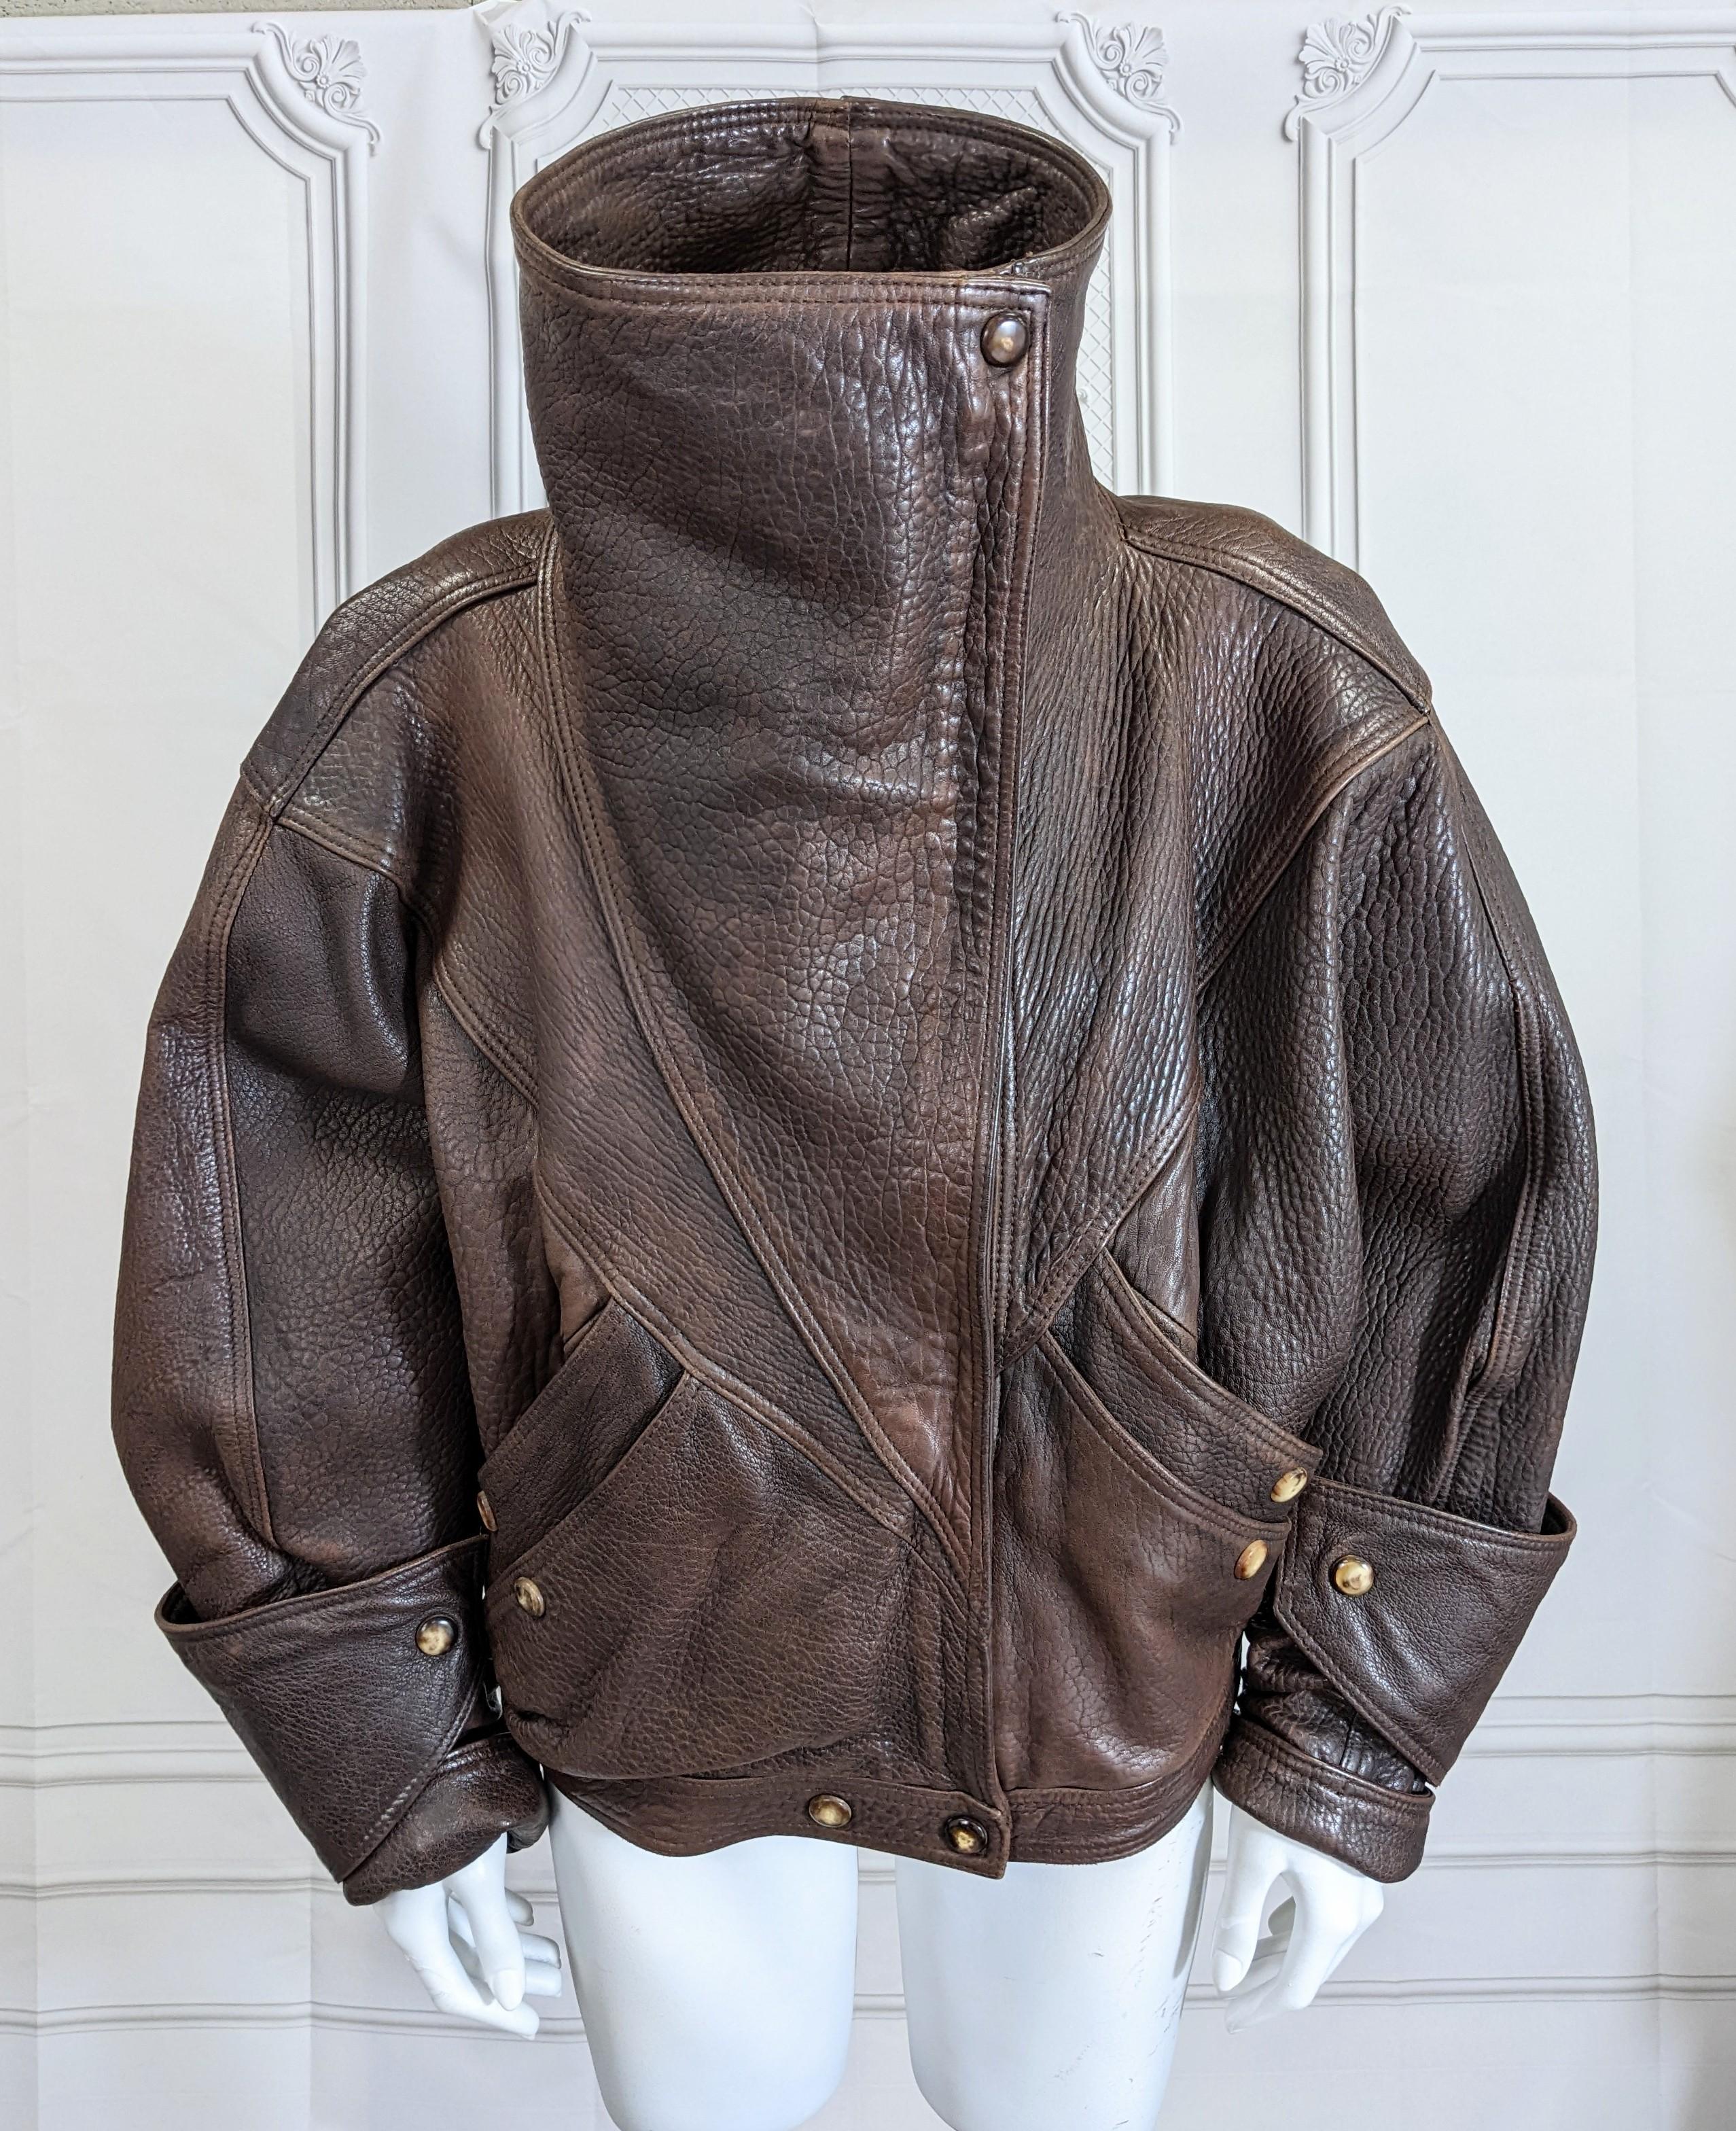 Rare, iconic Anne Marie Beretta bomber jacket in brown buffalo textured leather with extraordinary signature detailing such as her funnel collar and shark's fin wristlets.
One of the most under rated Parisian designers of the 80's, Beretta appealed